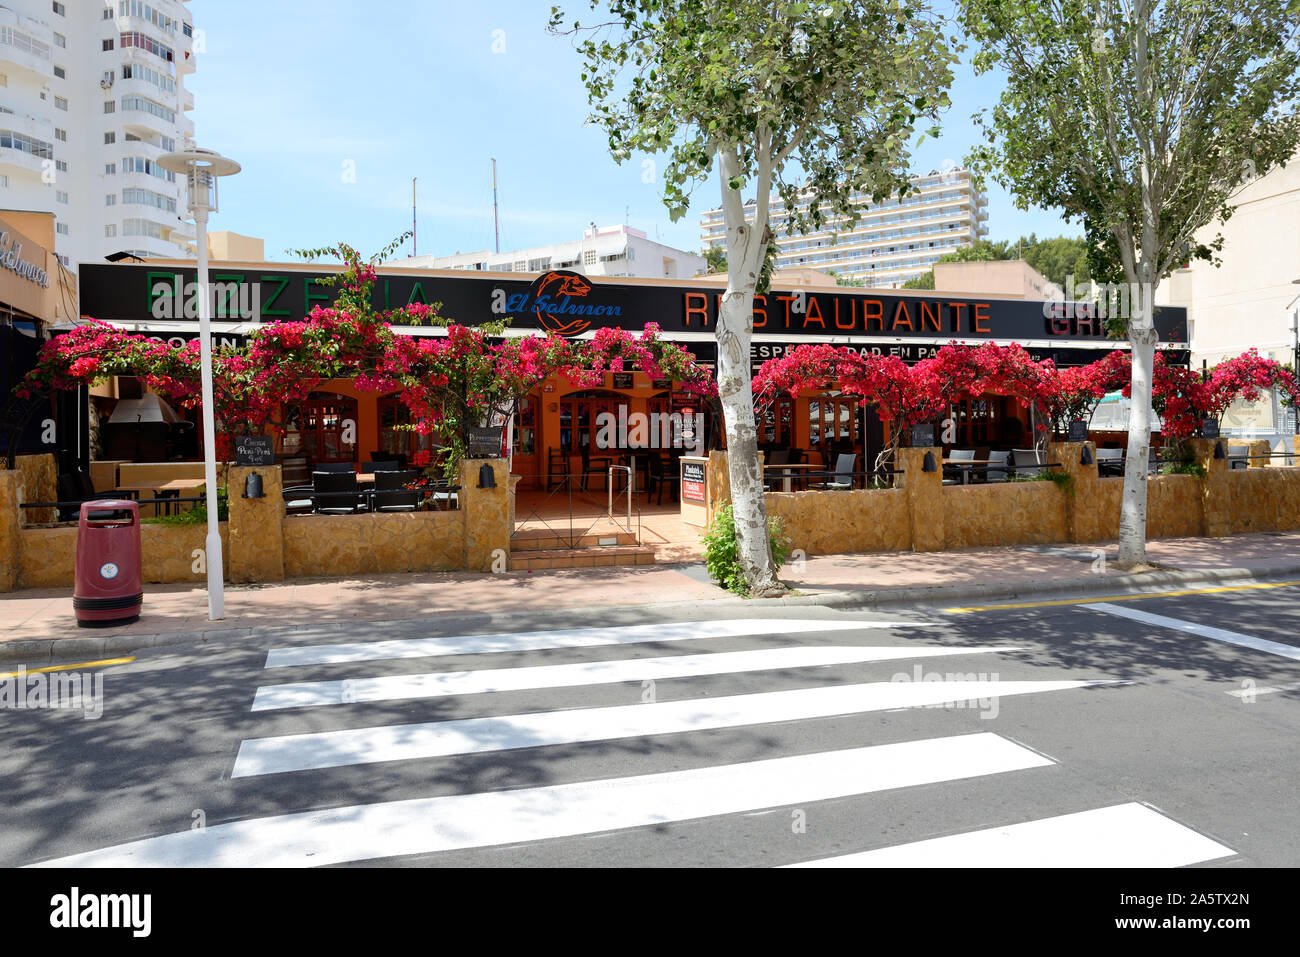 MALLORCA, SPAIN - MAY 29: The restaurant and outdoor terrace near street on May 29, 2015 in Mallorca, Spain. Up to 60 mln tourists is expected to visi Stock Photo